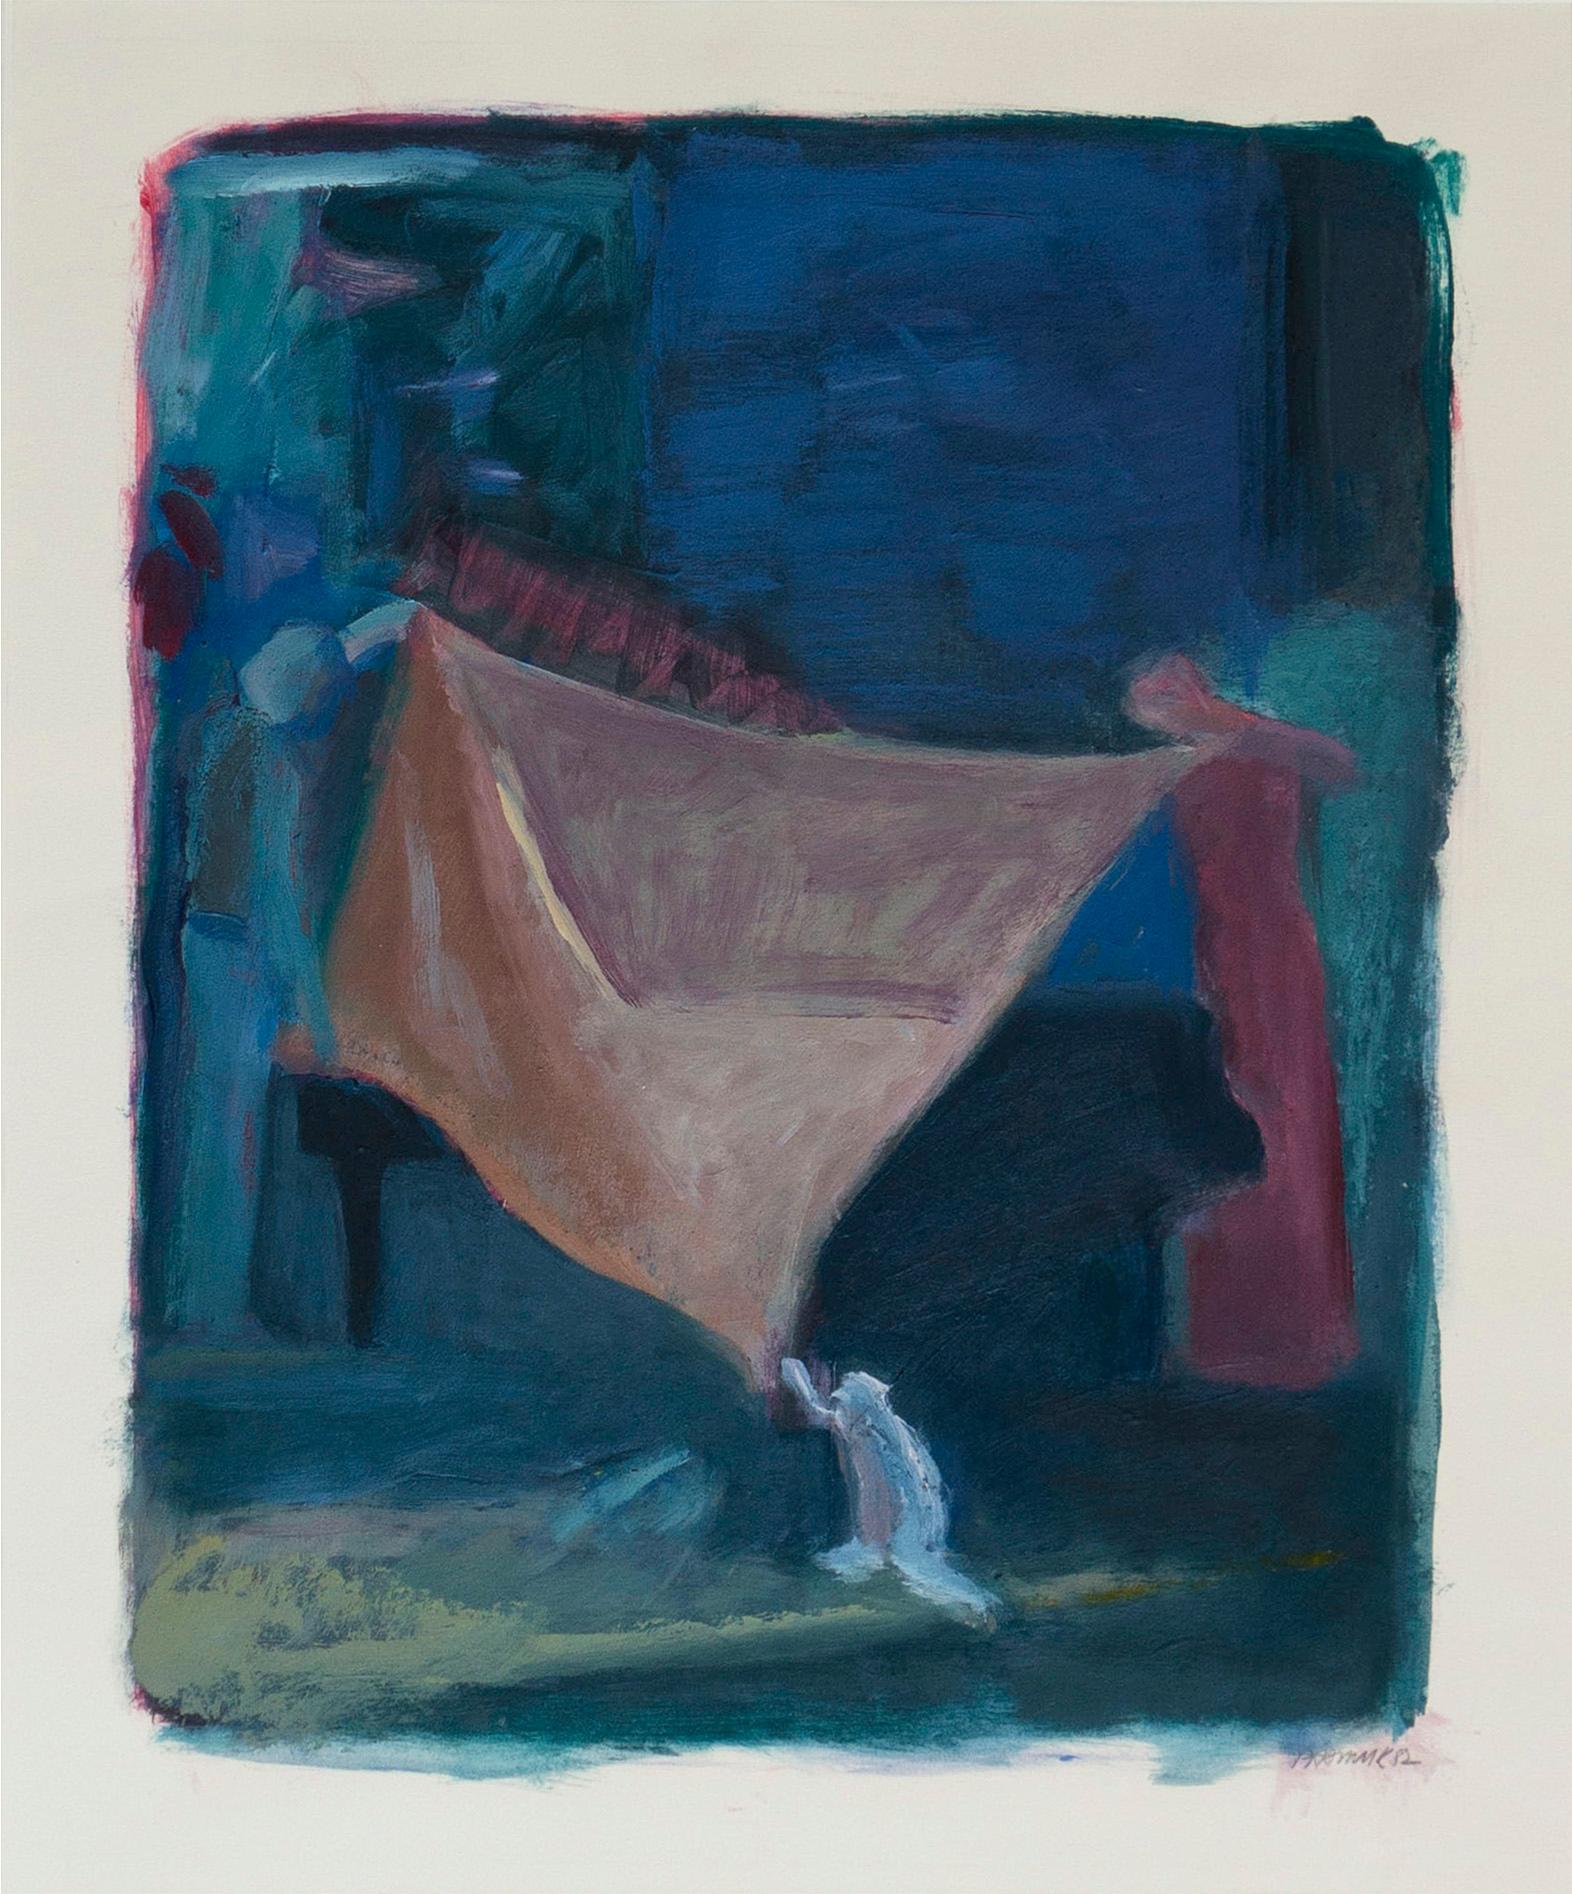 Edward Pramuk Interior Painting - "Covering: Blue Wall" 1982, Acrylic and Mixed Media on Rives paper, Unframed